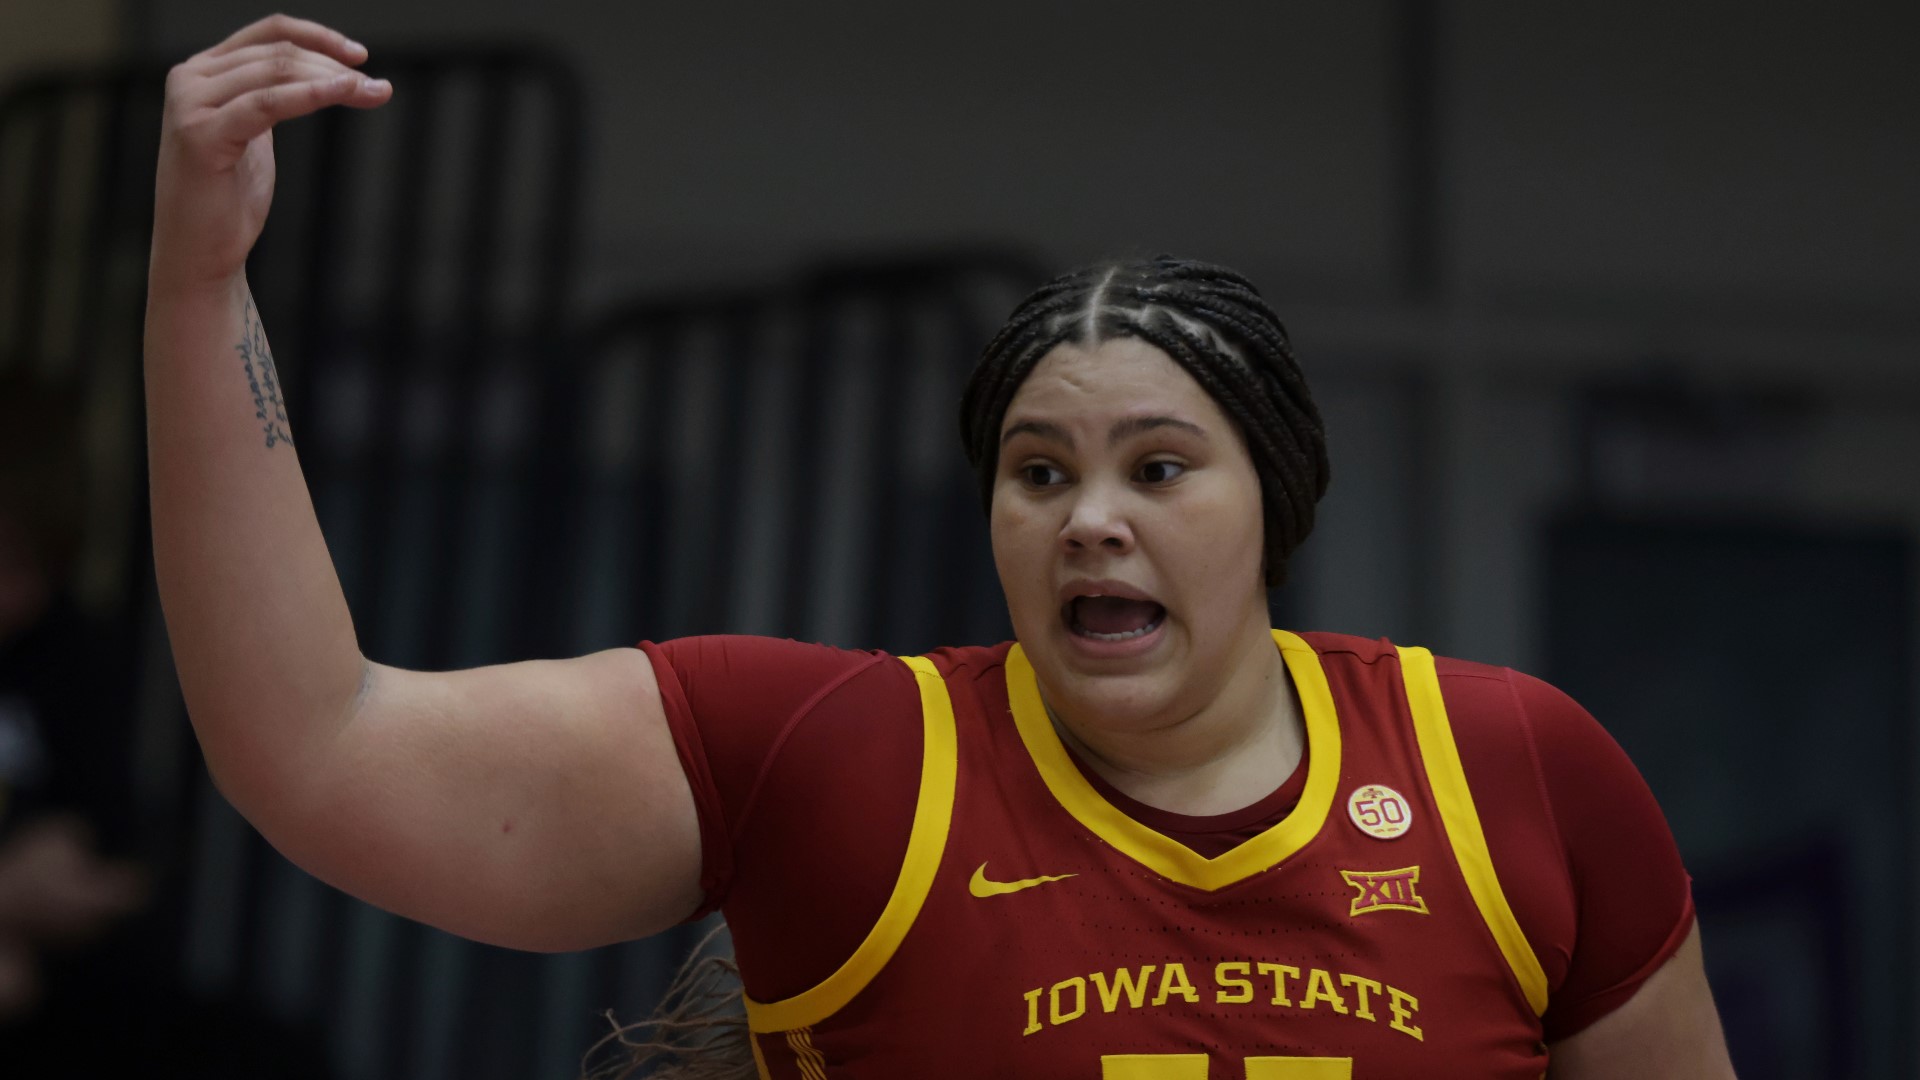 The Bishop Garrigan grad has averaged 17 points and six rebounds over her past three games.